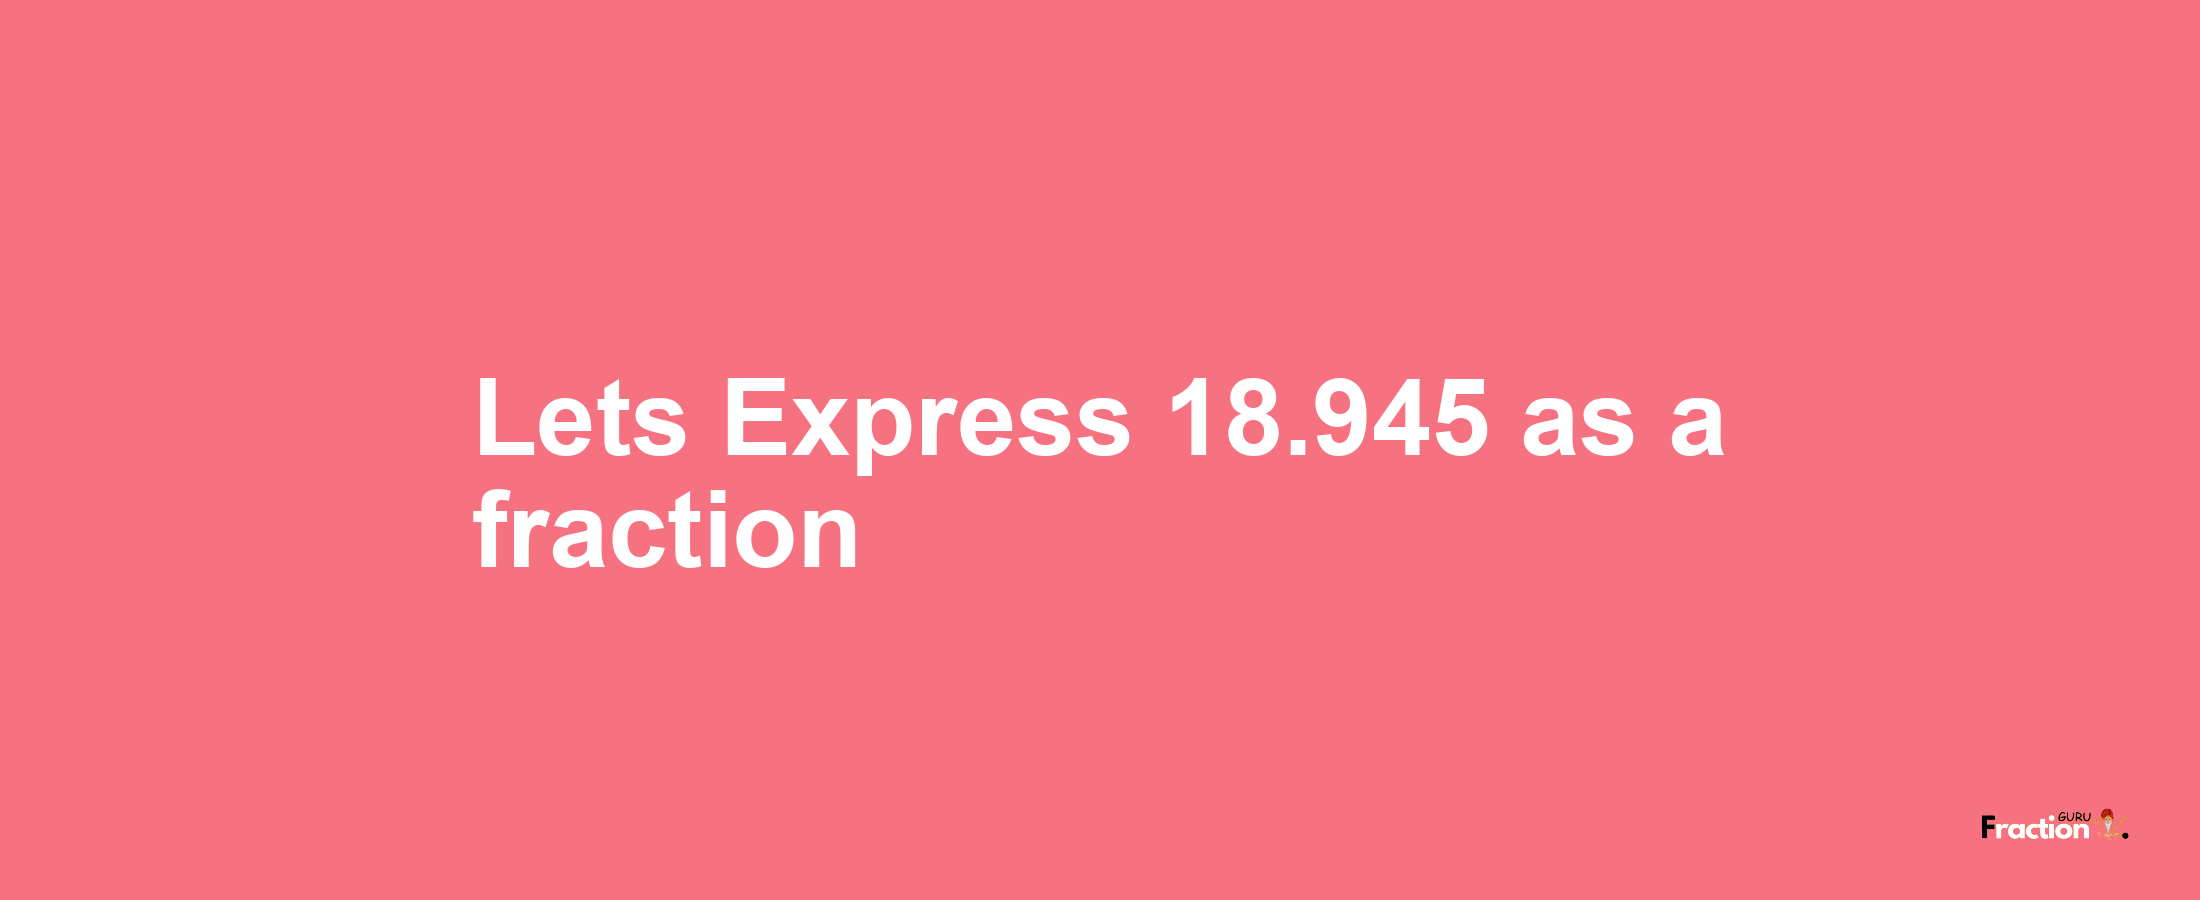 Lets Express 18.945 as afraction